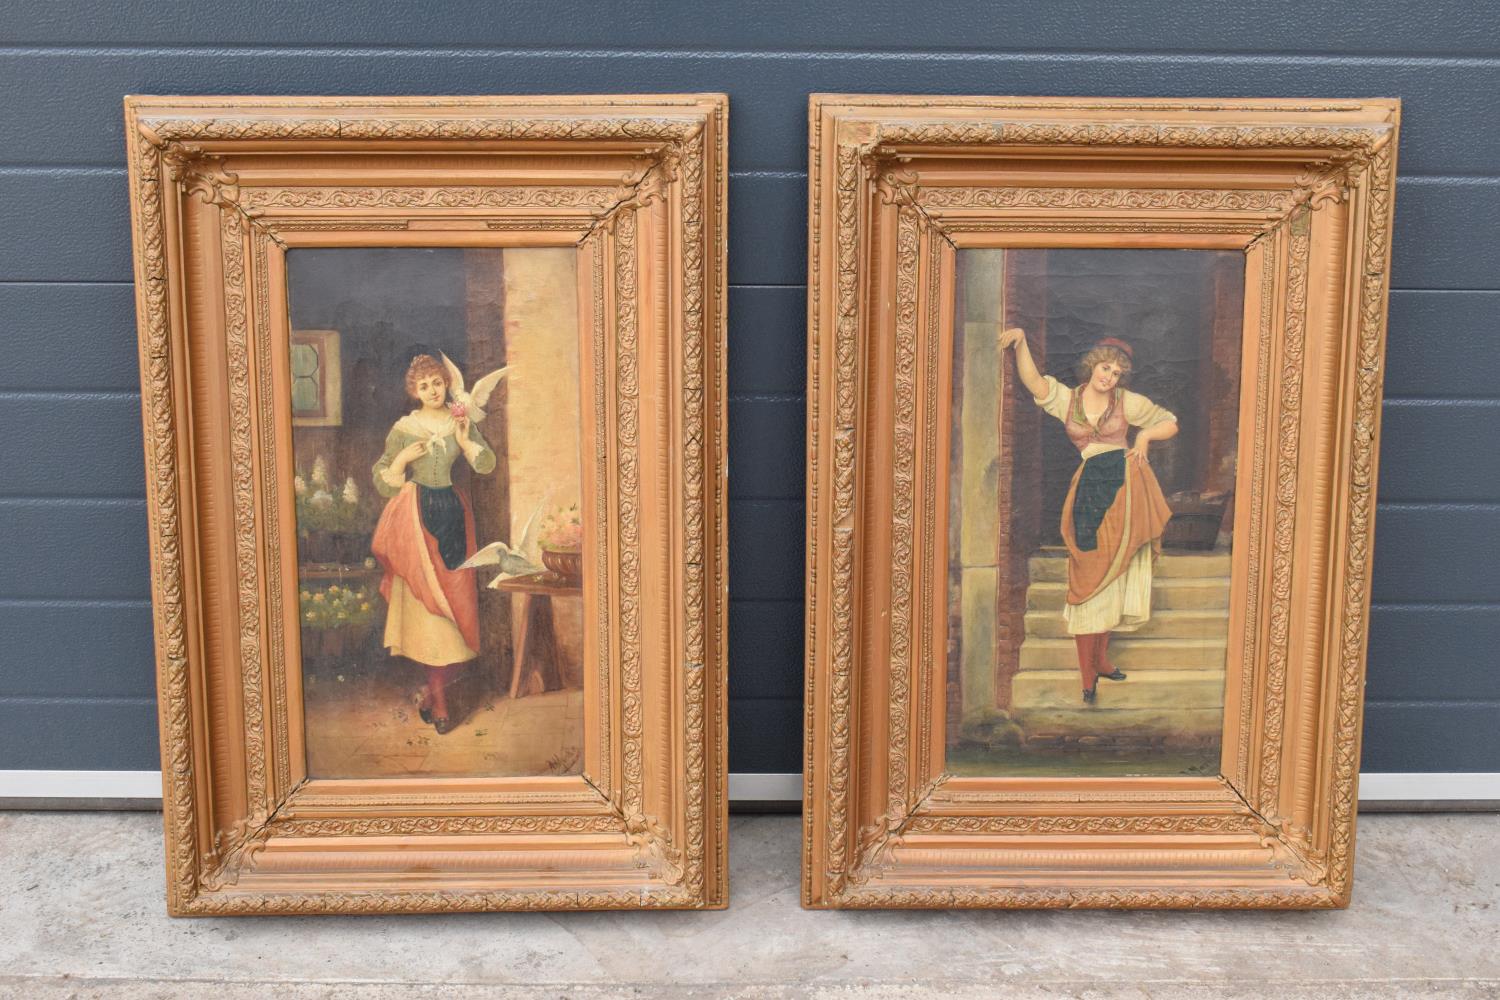 A pair of 19th century oil paintings on canvas depicting pretty ladies in room settings.